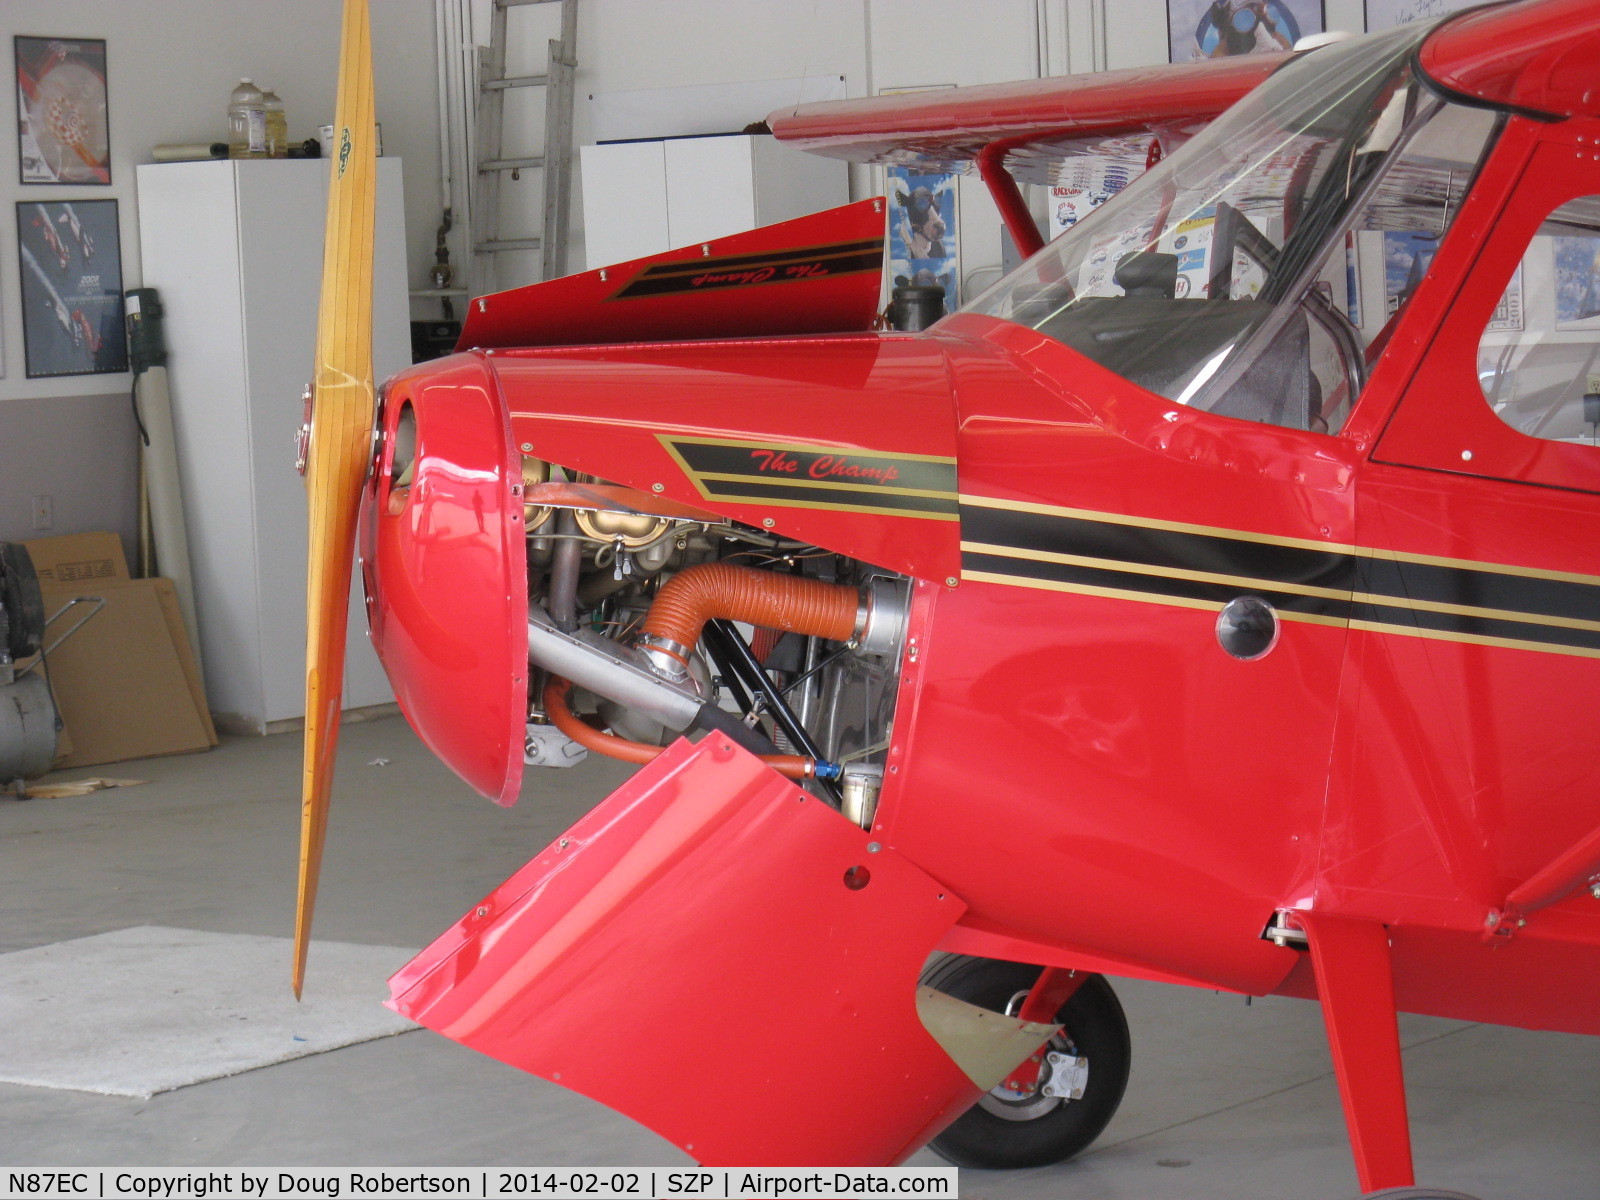 N87EC, 2007 American Champion 7EC C/N 1010-2007, 2007 American Champion 7EC 'The Champ' LSA, Continental O-200A lightweight 100 Hp, wood prop & reduced fuel to meet LSA weight limit of 1,320 lb. Cowls opened.